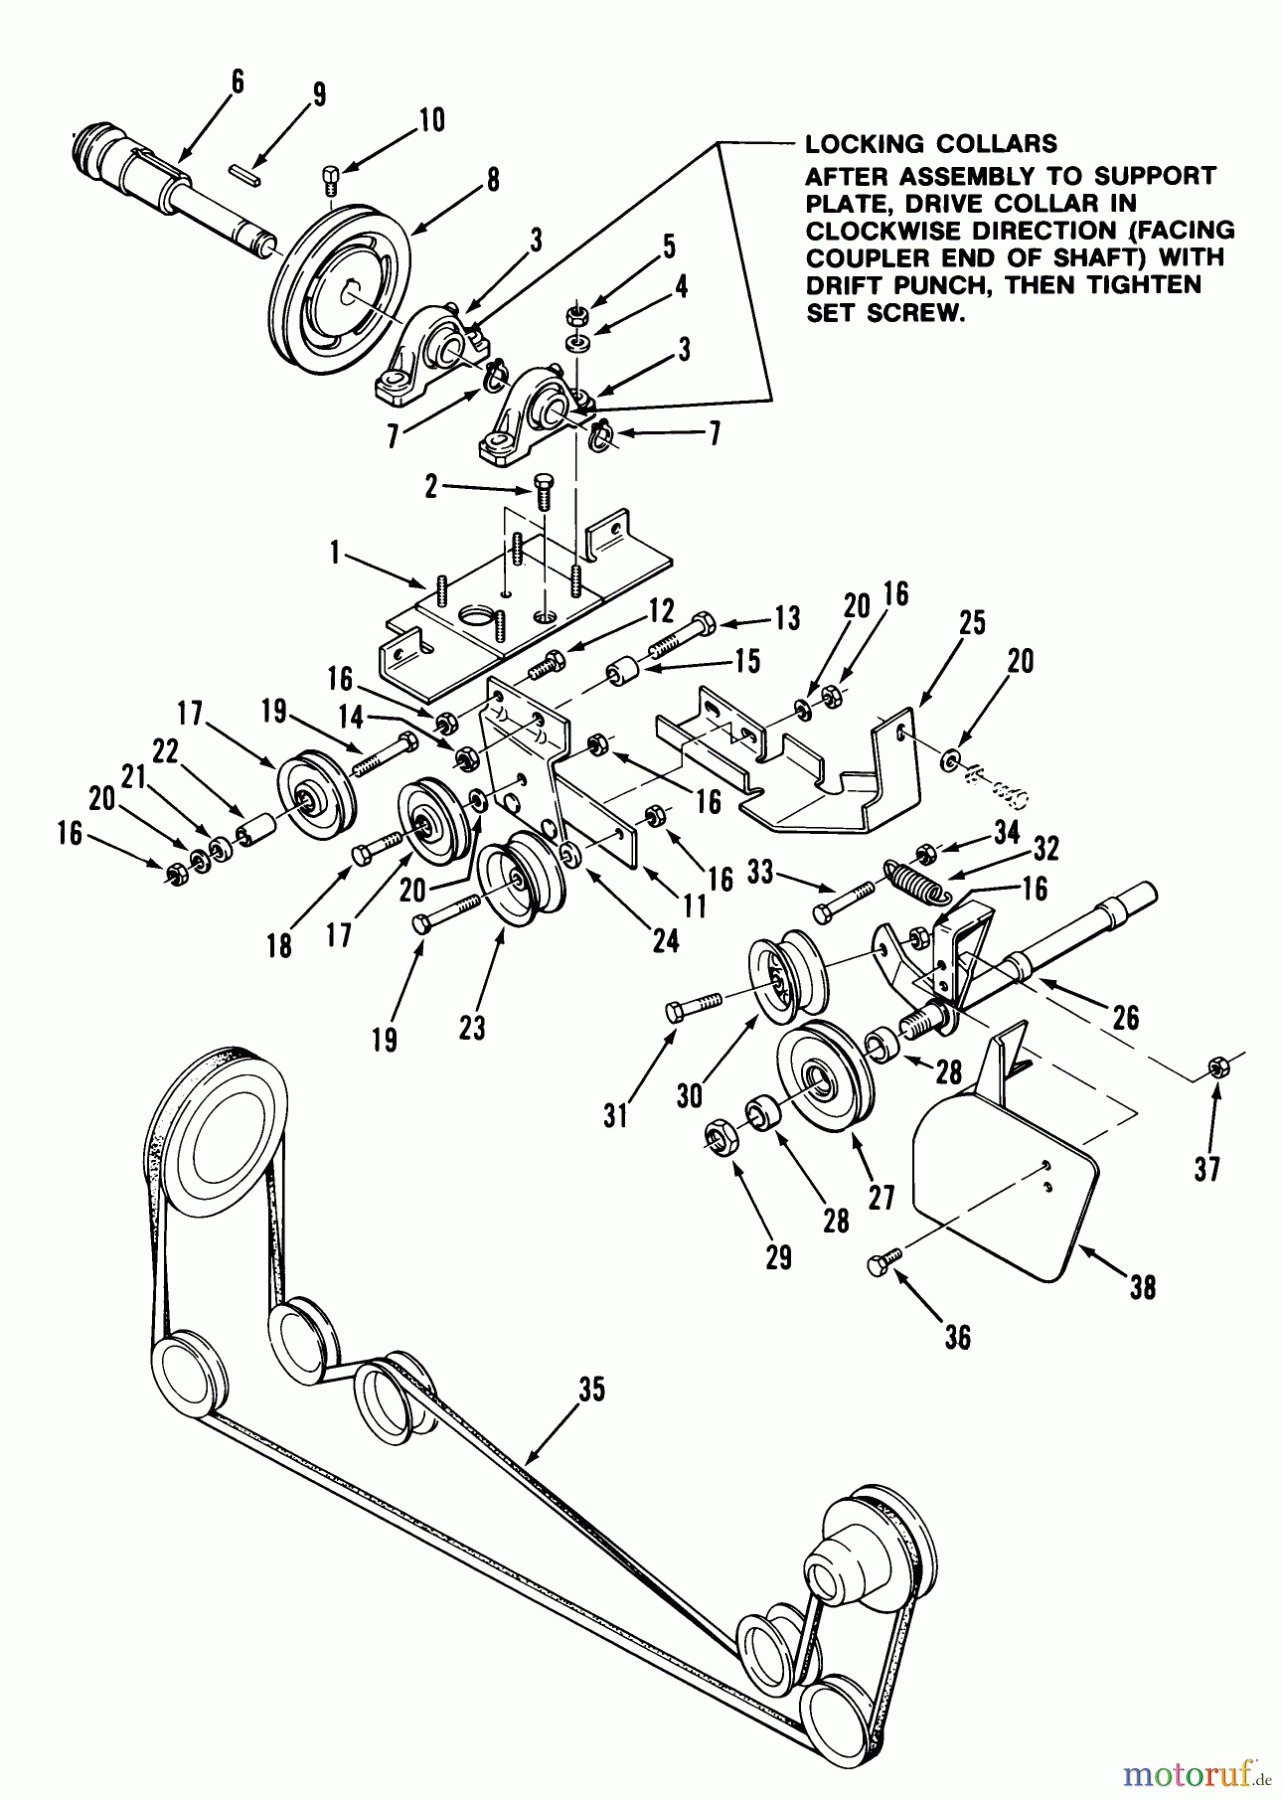  Toro Neu Accessories 83231 - Toro Rear PTO, 1983 PARTS LIST FOR REAR PTO FACTORY ORDER NUMBER 8-3231